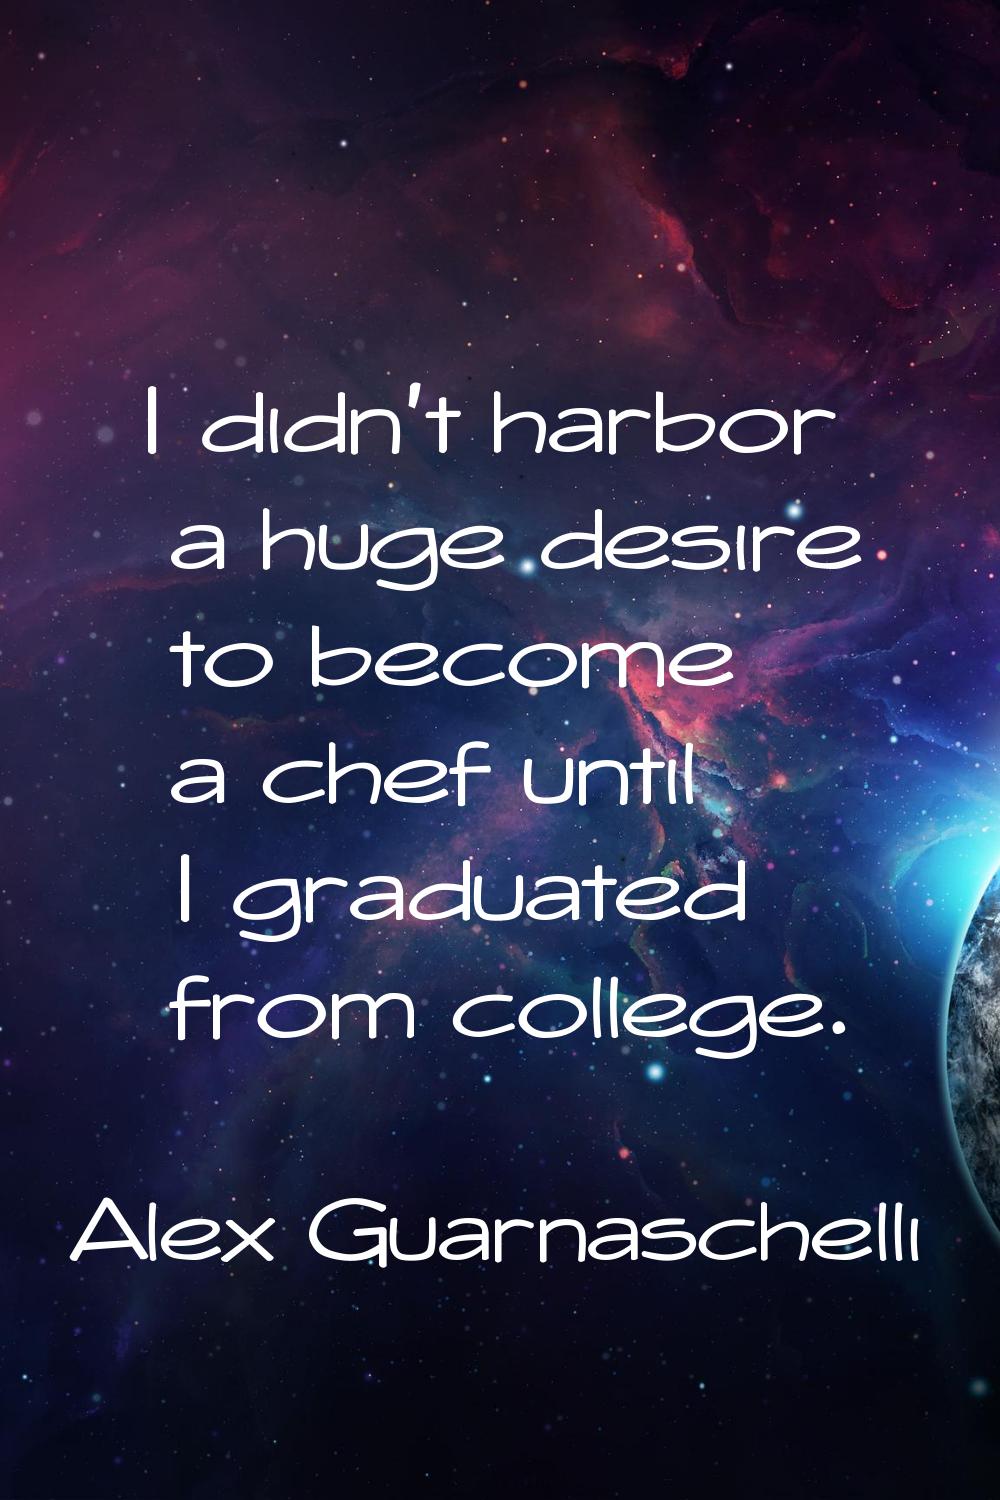 I didn't harbor a huge desire to become a chef until I graduated from college.